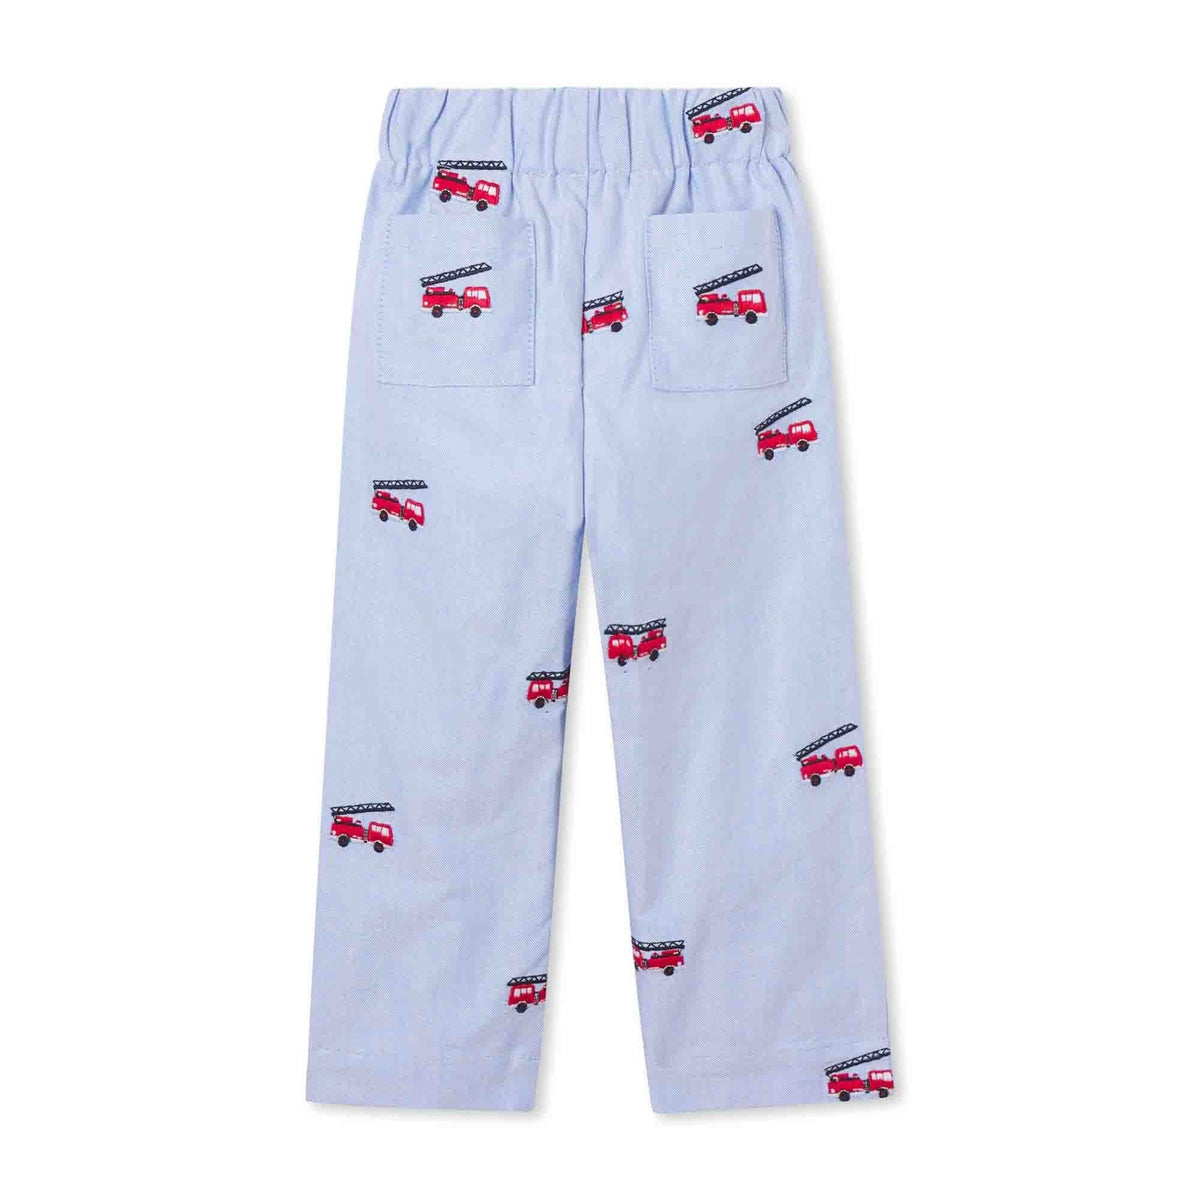 Classic and Preppy Myles Slim Pant, Nantucket Breeze Fire Truck Embroidery-Bottoms-CPC - Classic Prep Childrenswear